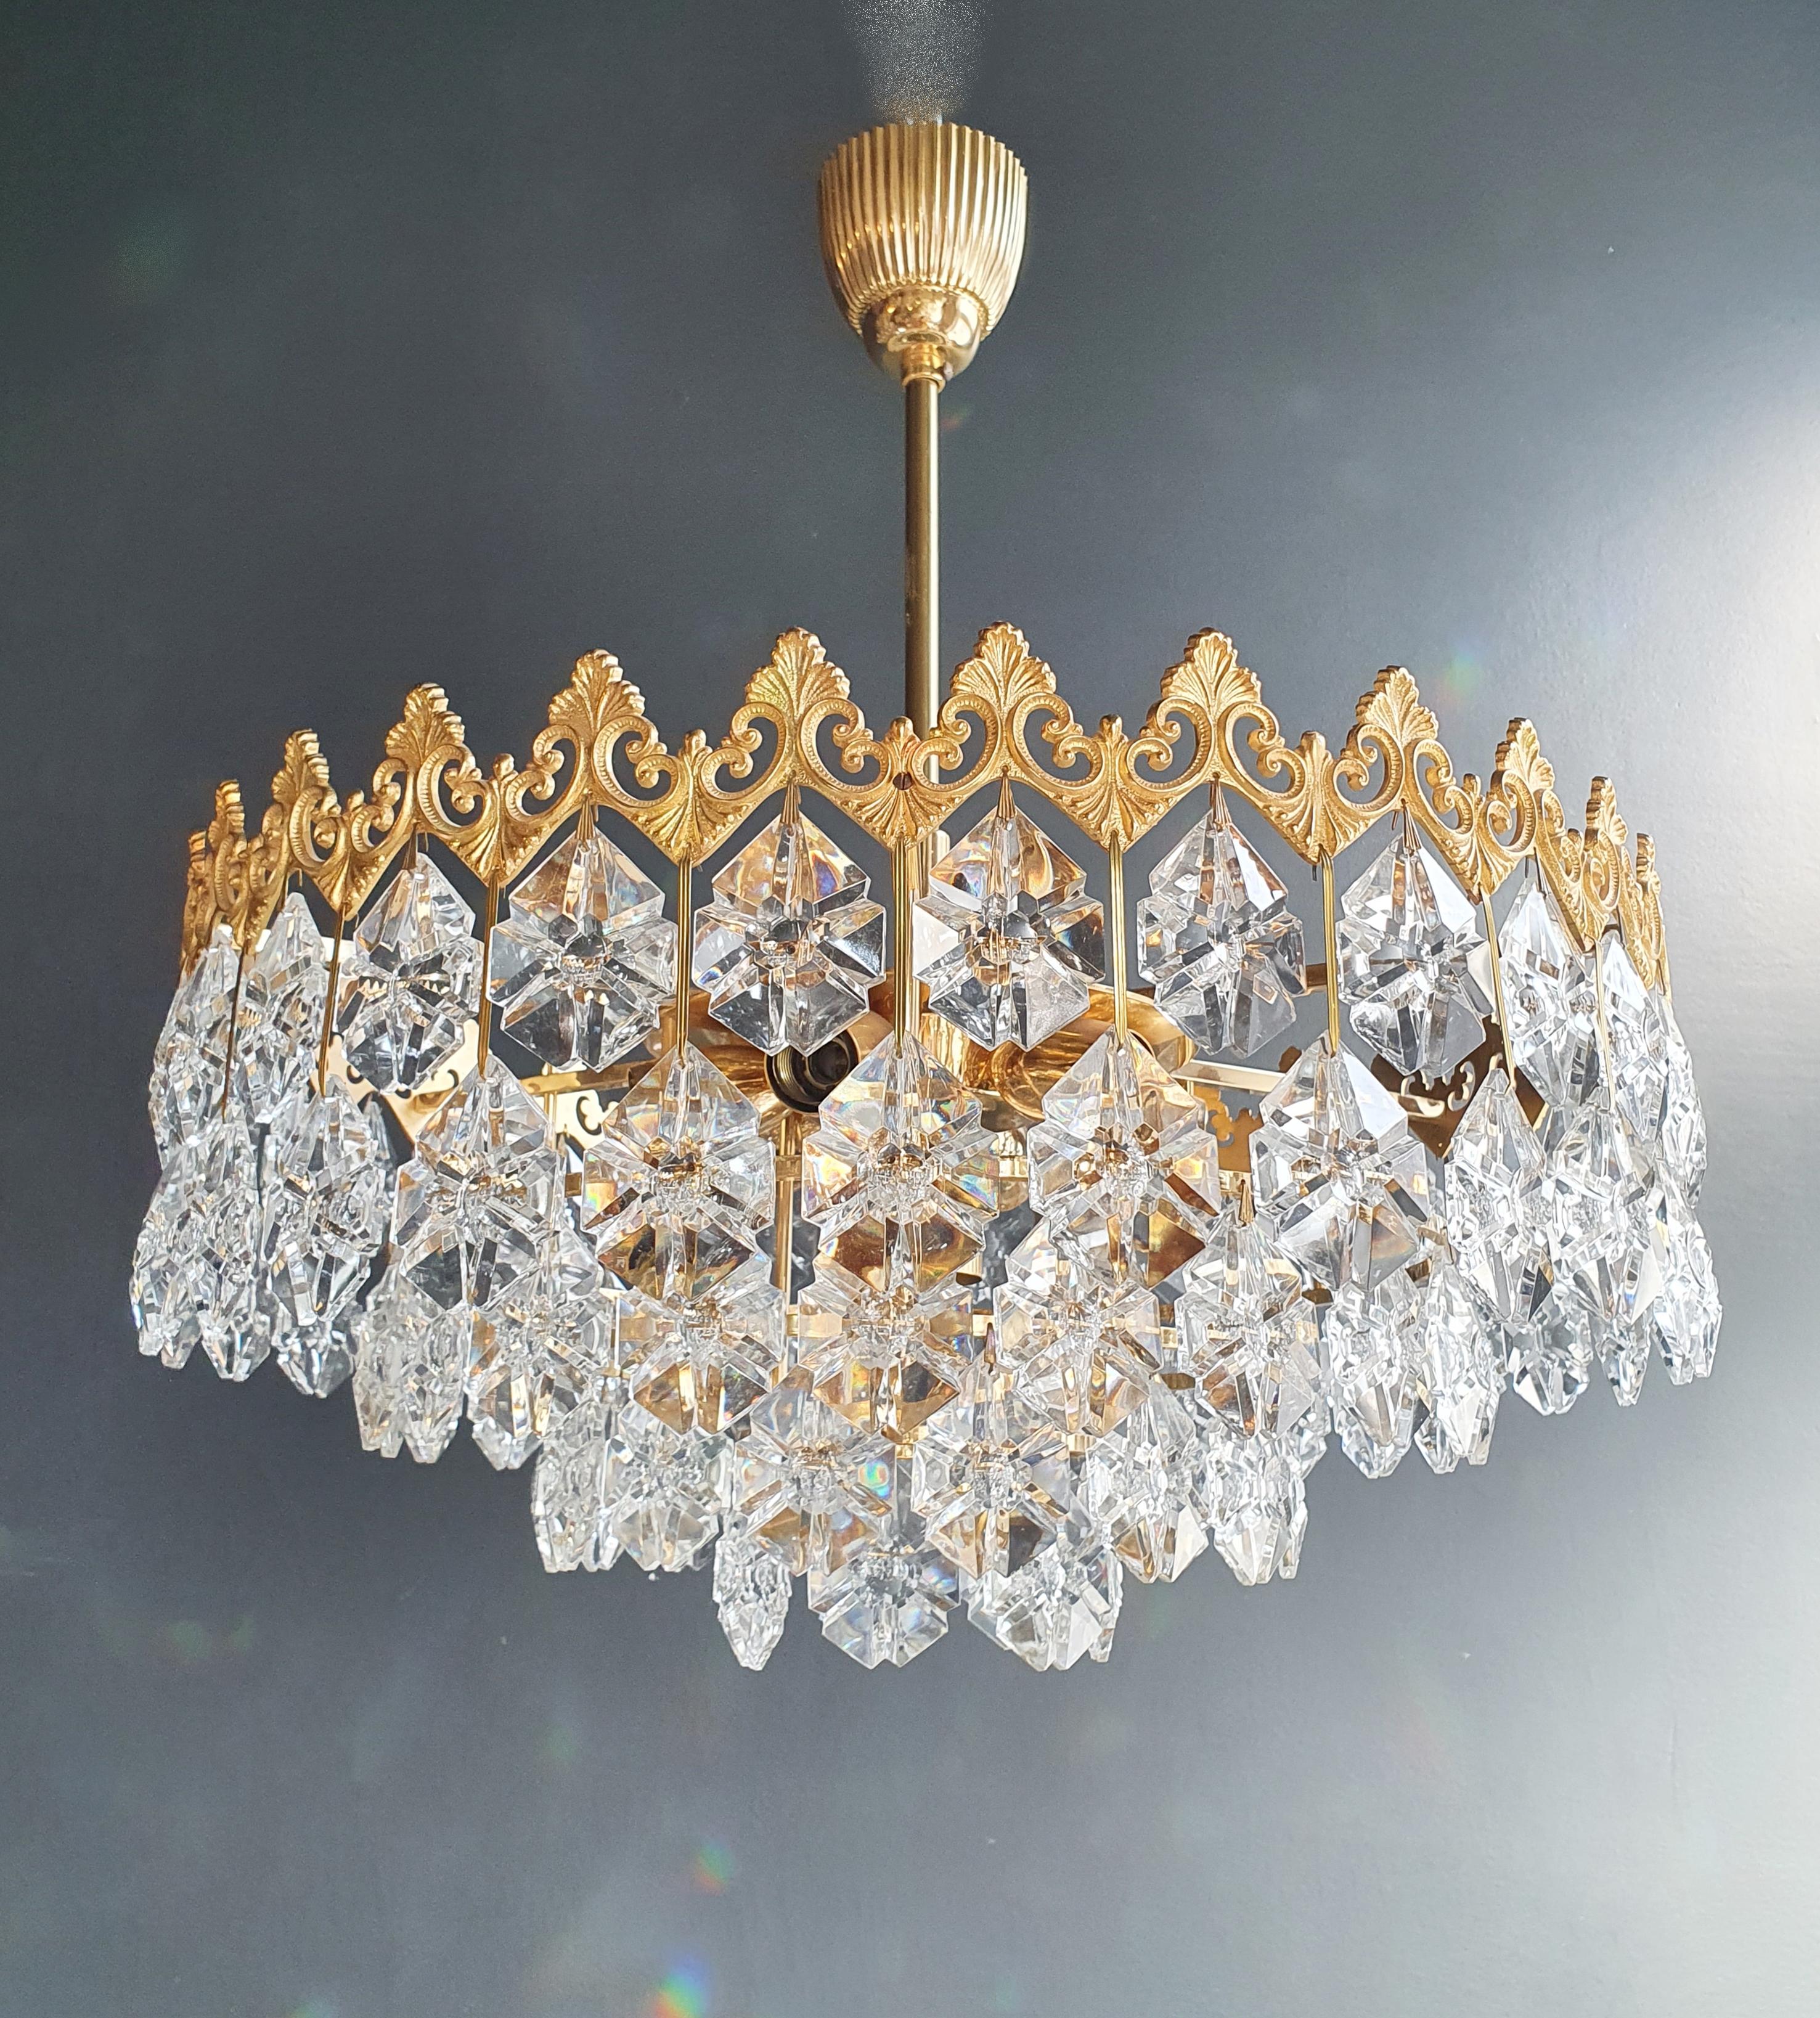 Low oval ceiling crystal chandelier brass.
Cabling completely renewed. Crystal hand knotted.
Measures: Total height 55 cm, height without chain 30 cm, diameter 50 cm. weight (approximately) 15kg.

Number of lights: 7-light bulb sockets: E14 and